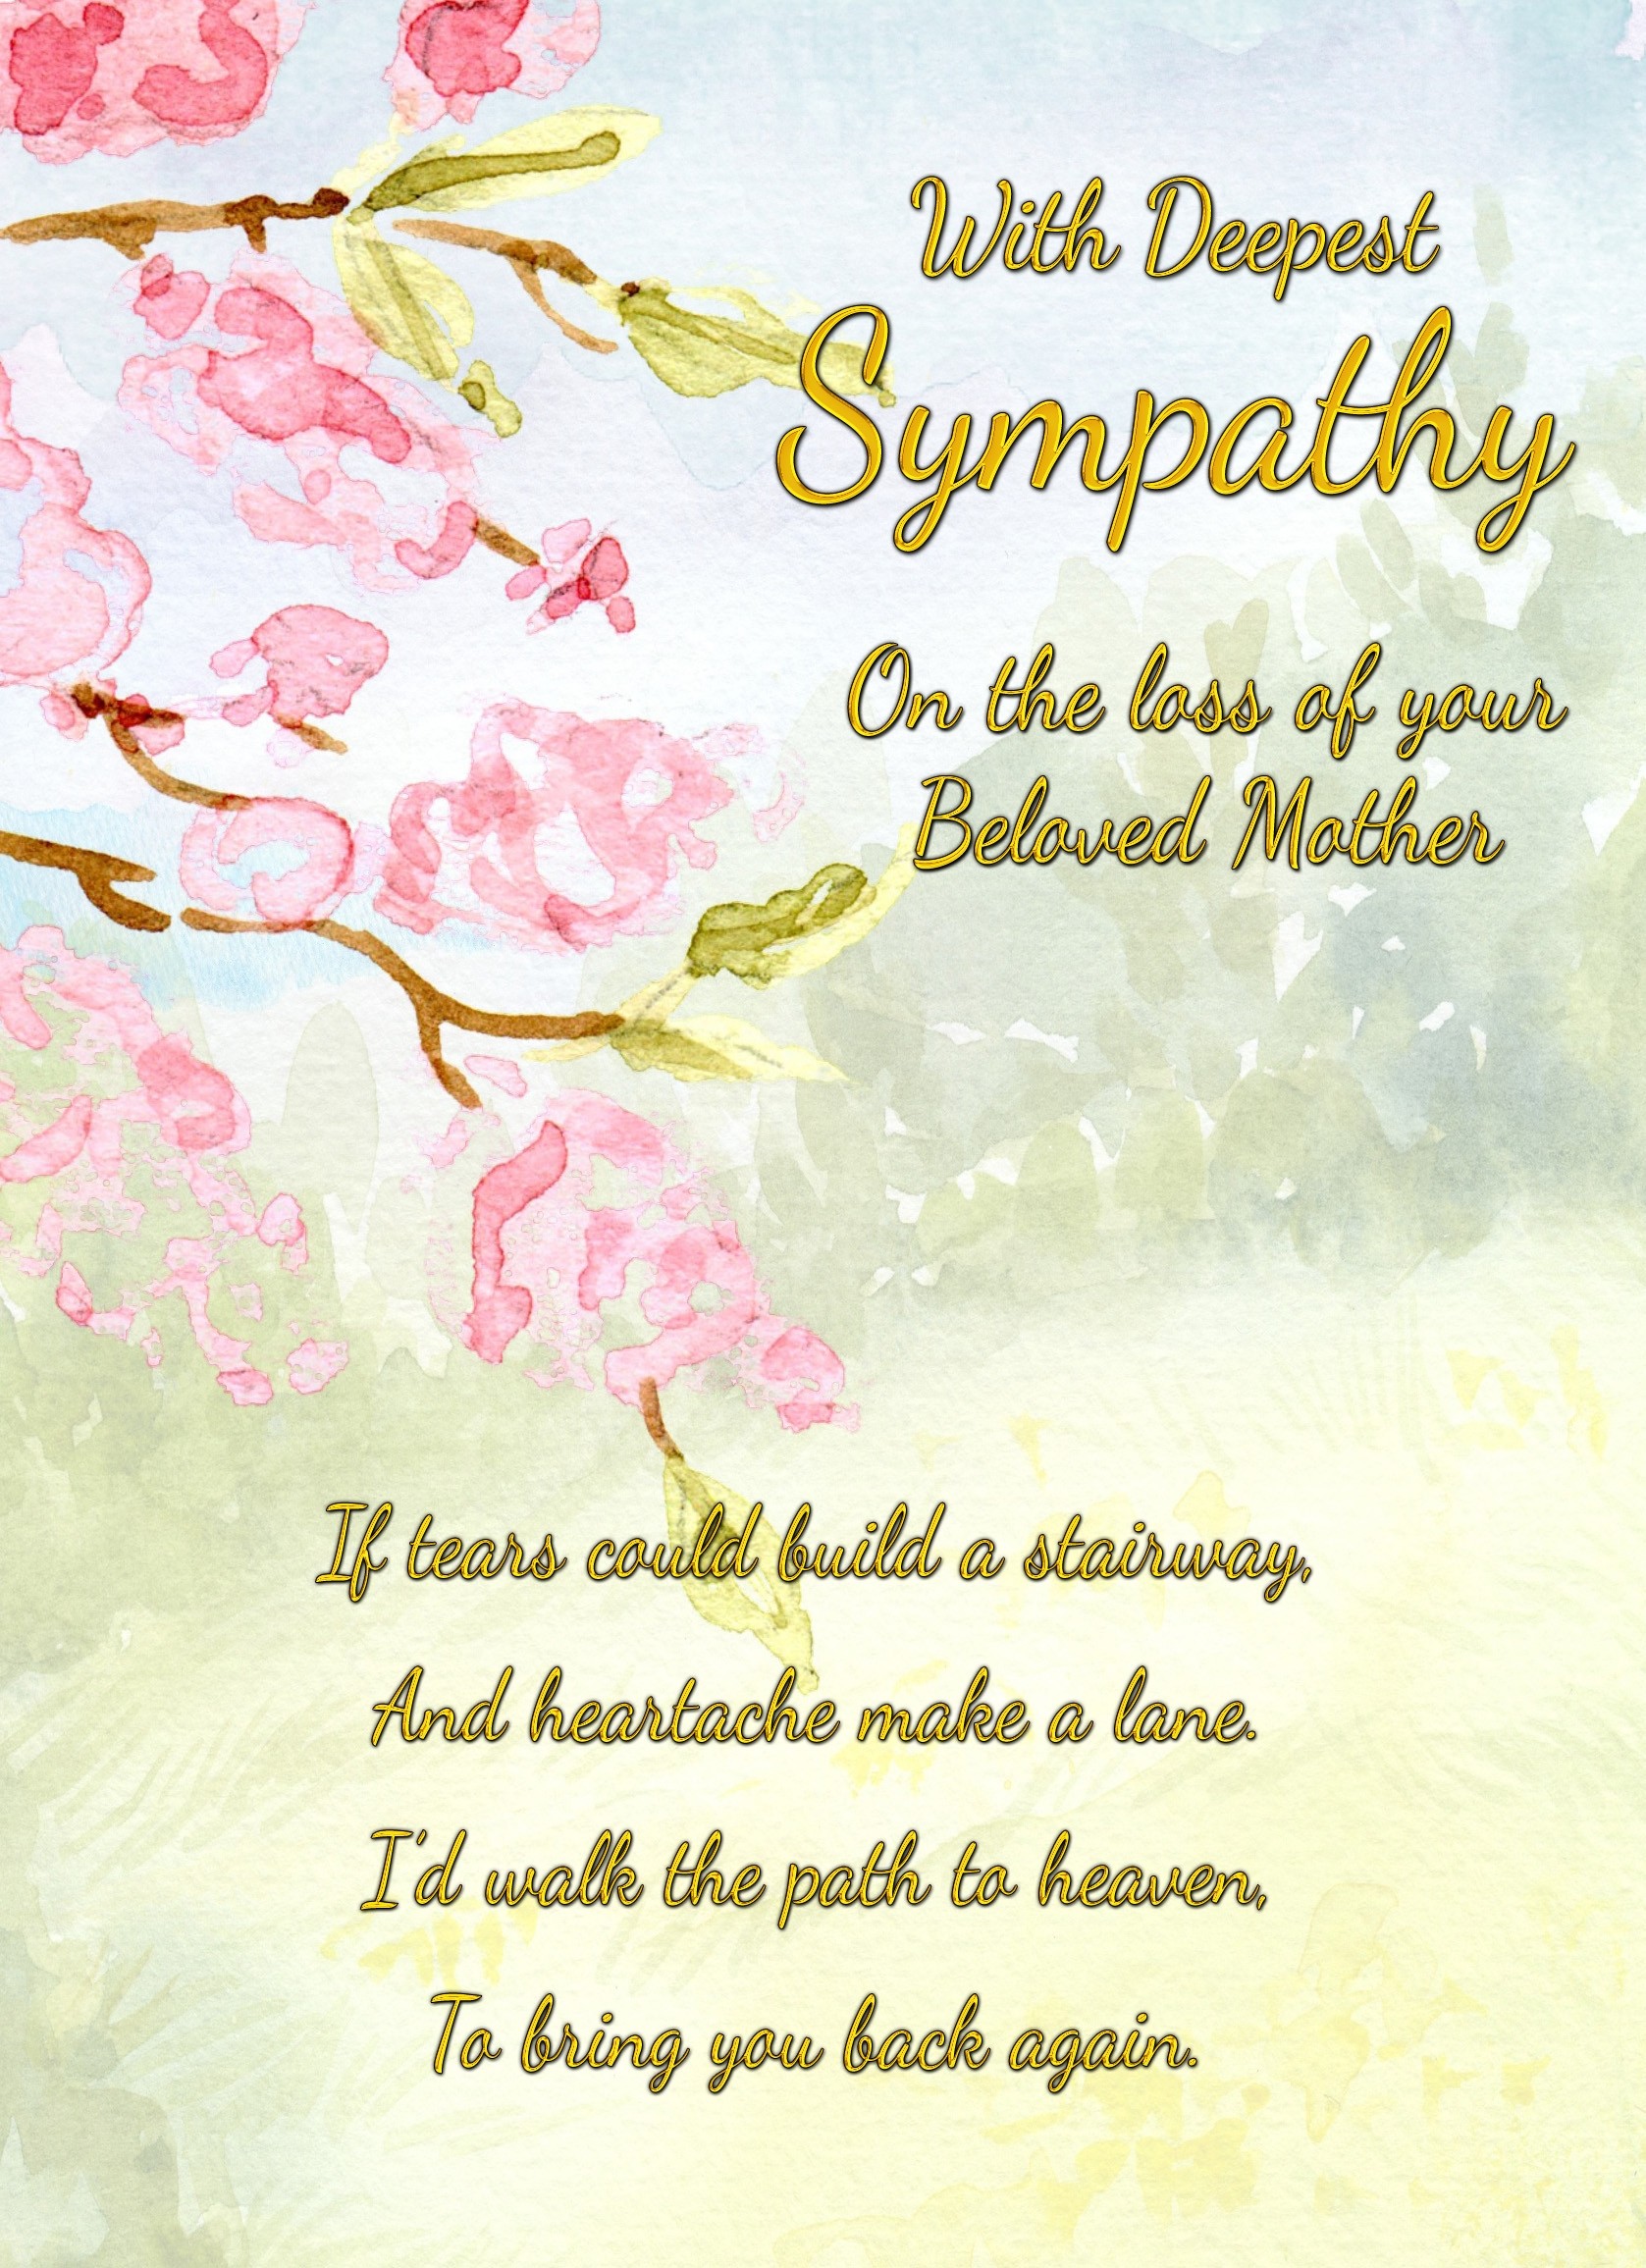 Sympathy Bereavement Card (With Deepest Sympathy, Beloved Mother)